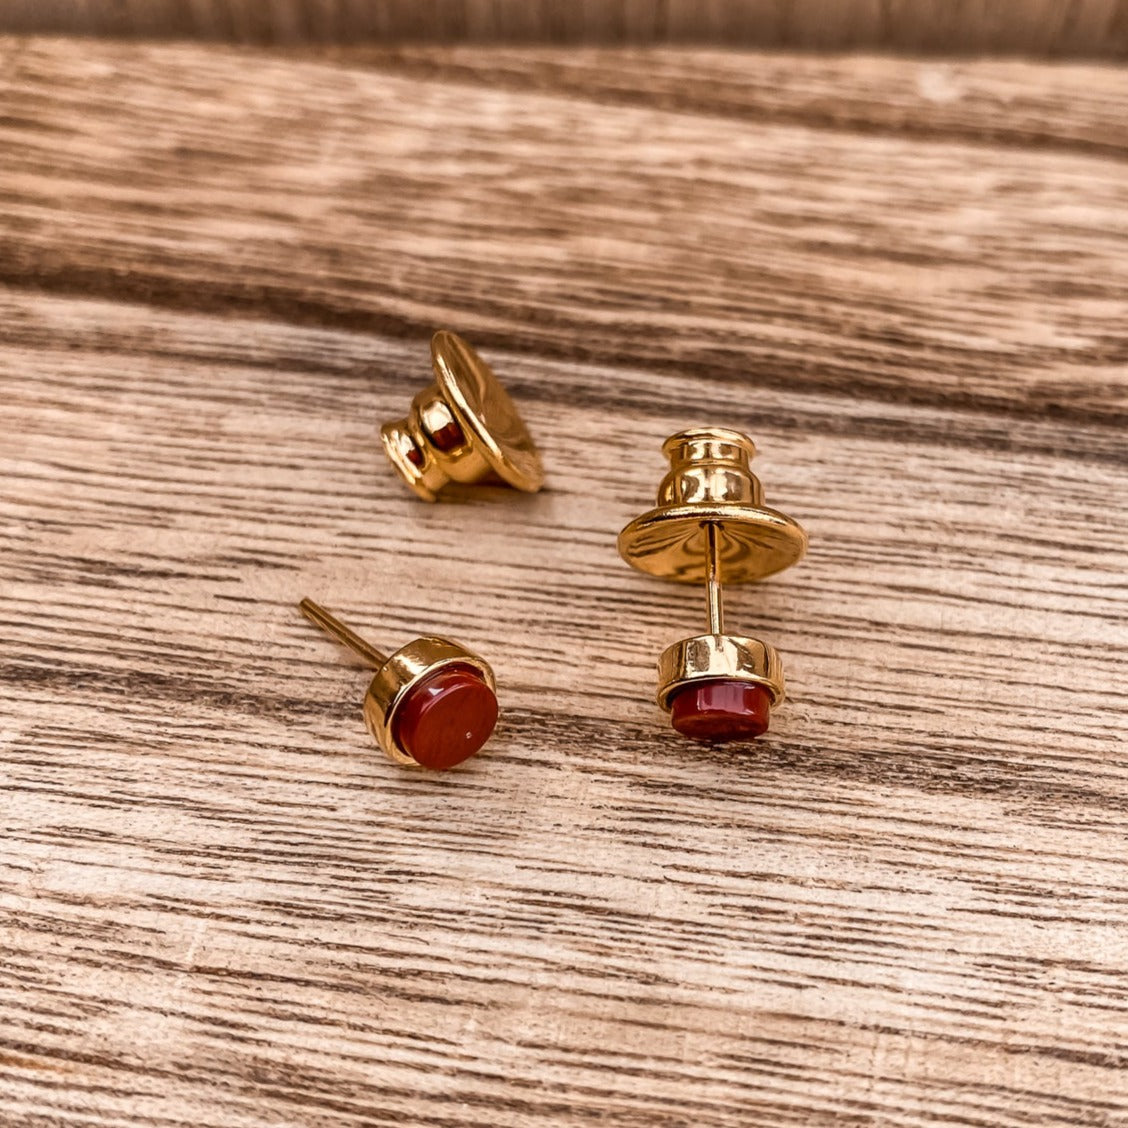 5mm Round Stud Yellow Gold Plated Earrings in Round Red Dyed Dolomite Natural Gemstone Made by Born to Rock. Online Jewelry Store Based in San Diego California